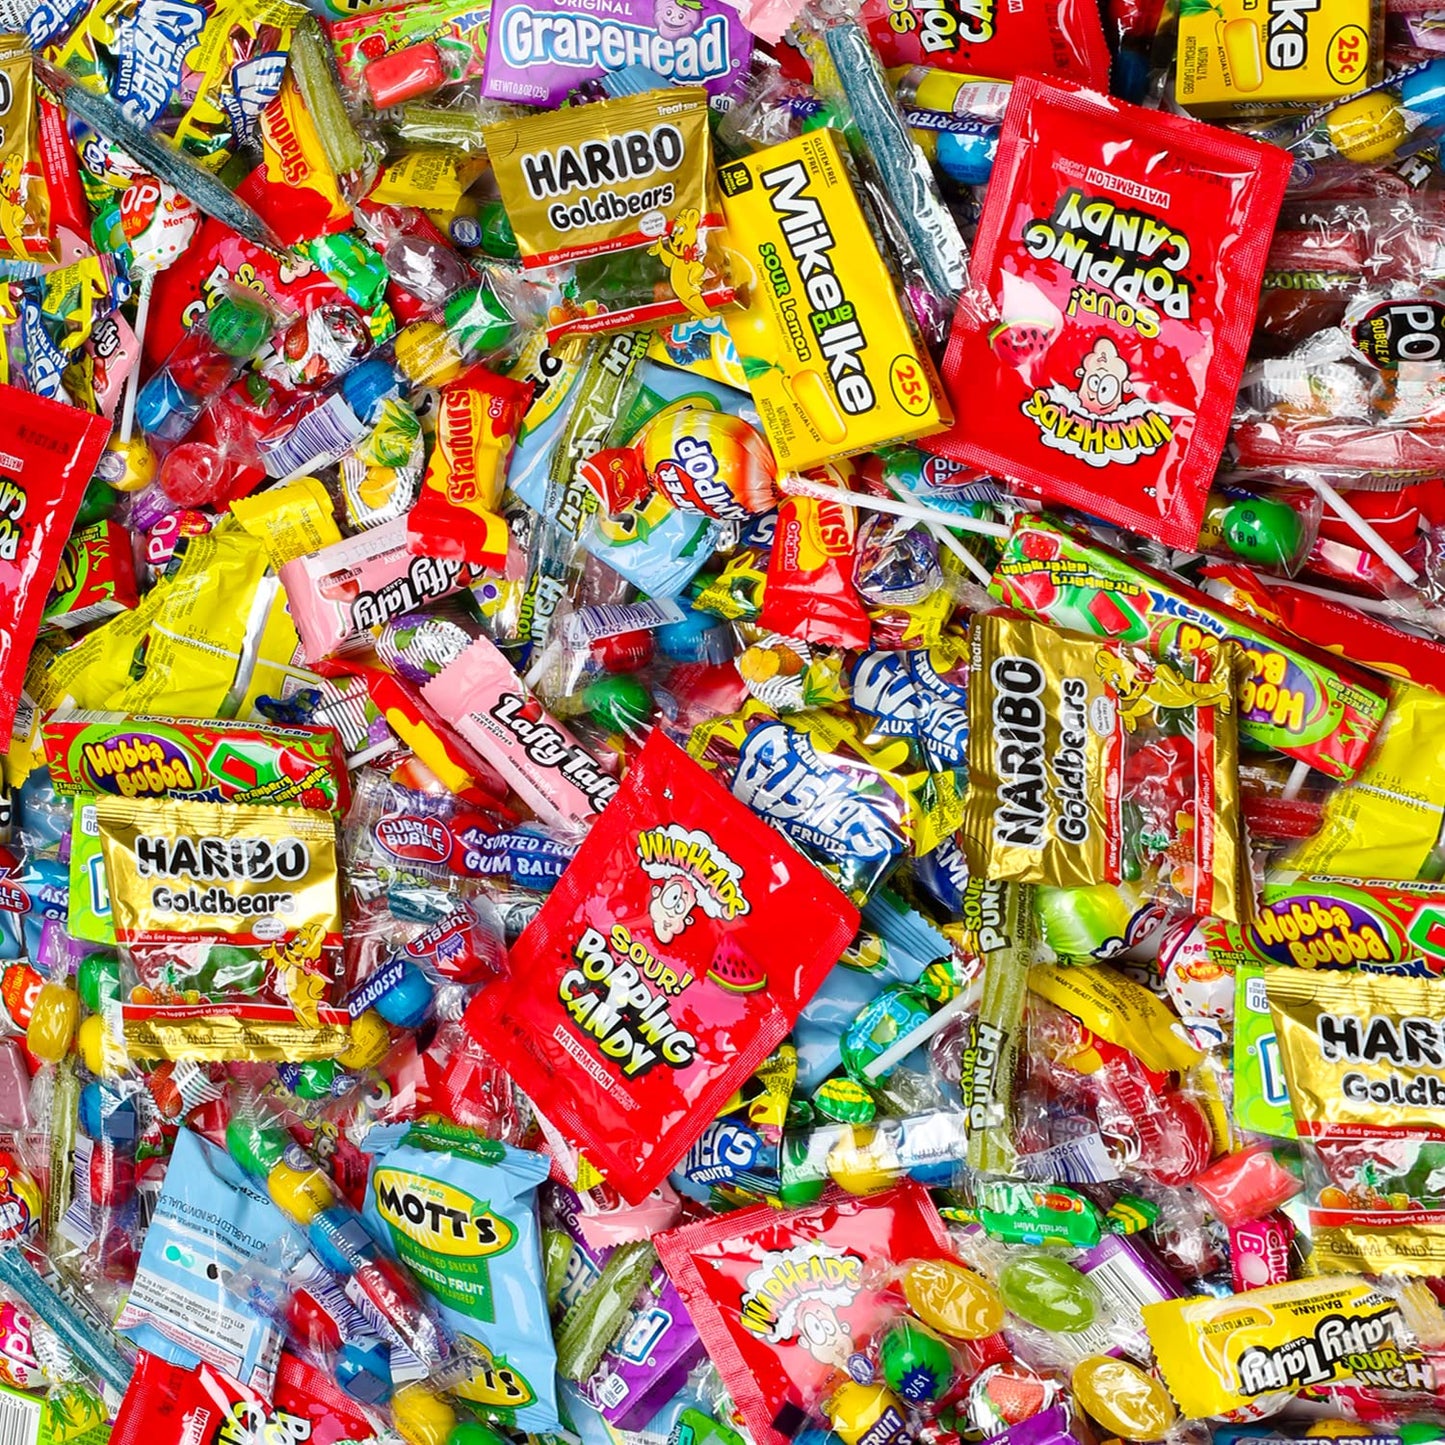 Lalees Candy Gift Box - 3 Pounds - Gifting Candy Baskets - Candy Box for Kids/Adults - Care Packages - Candy Variety Box - Crave Candy